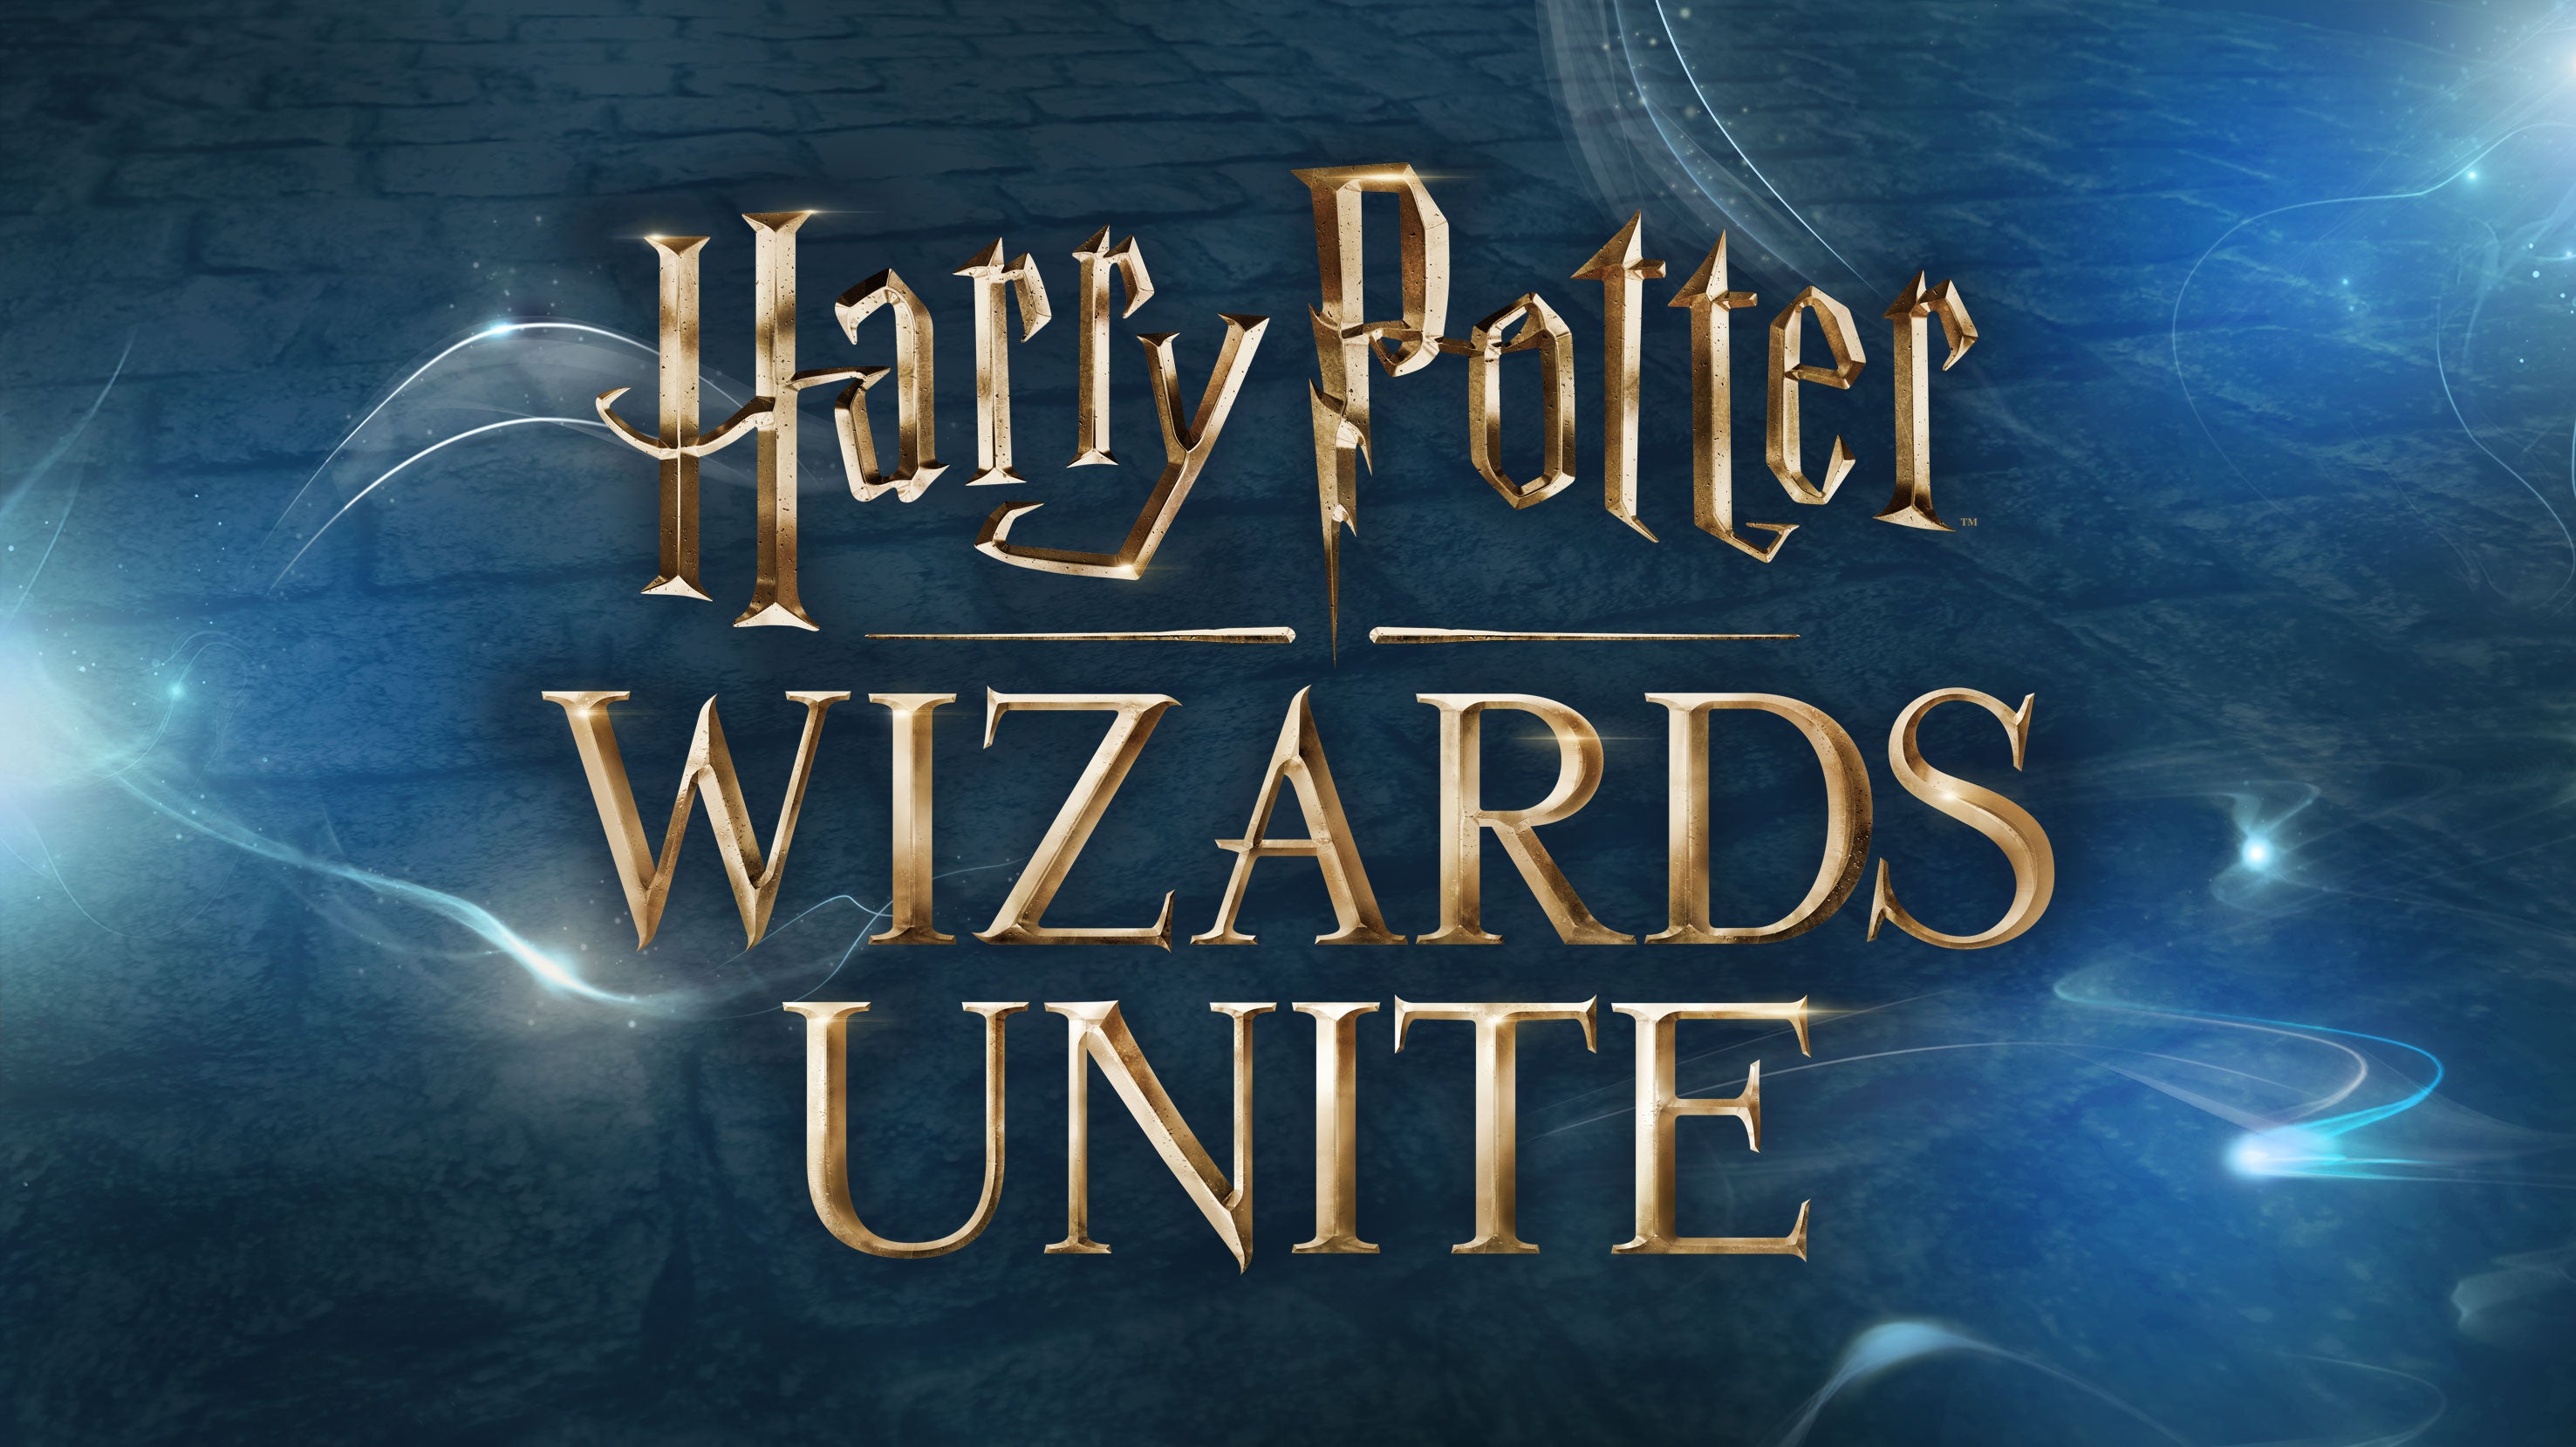 Image for You can now "enlist" for Harry Potter: Wizards Unite - coming in 2019